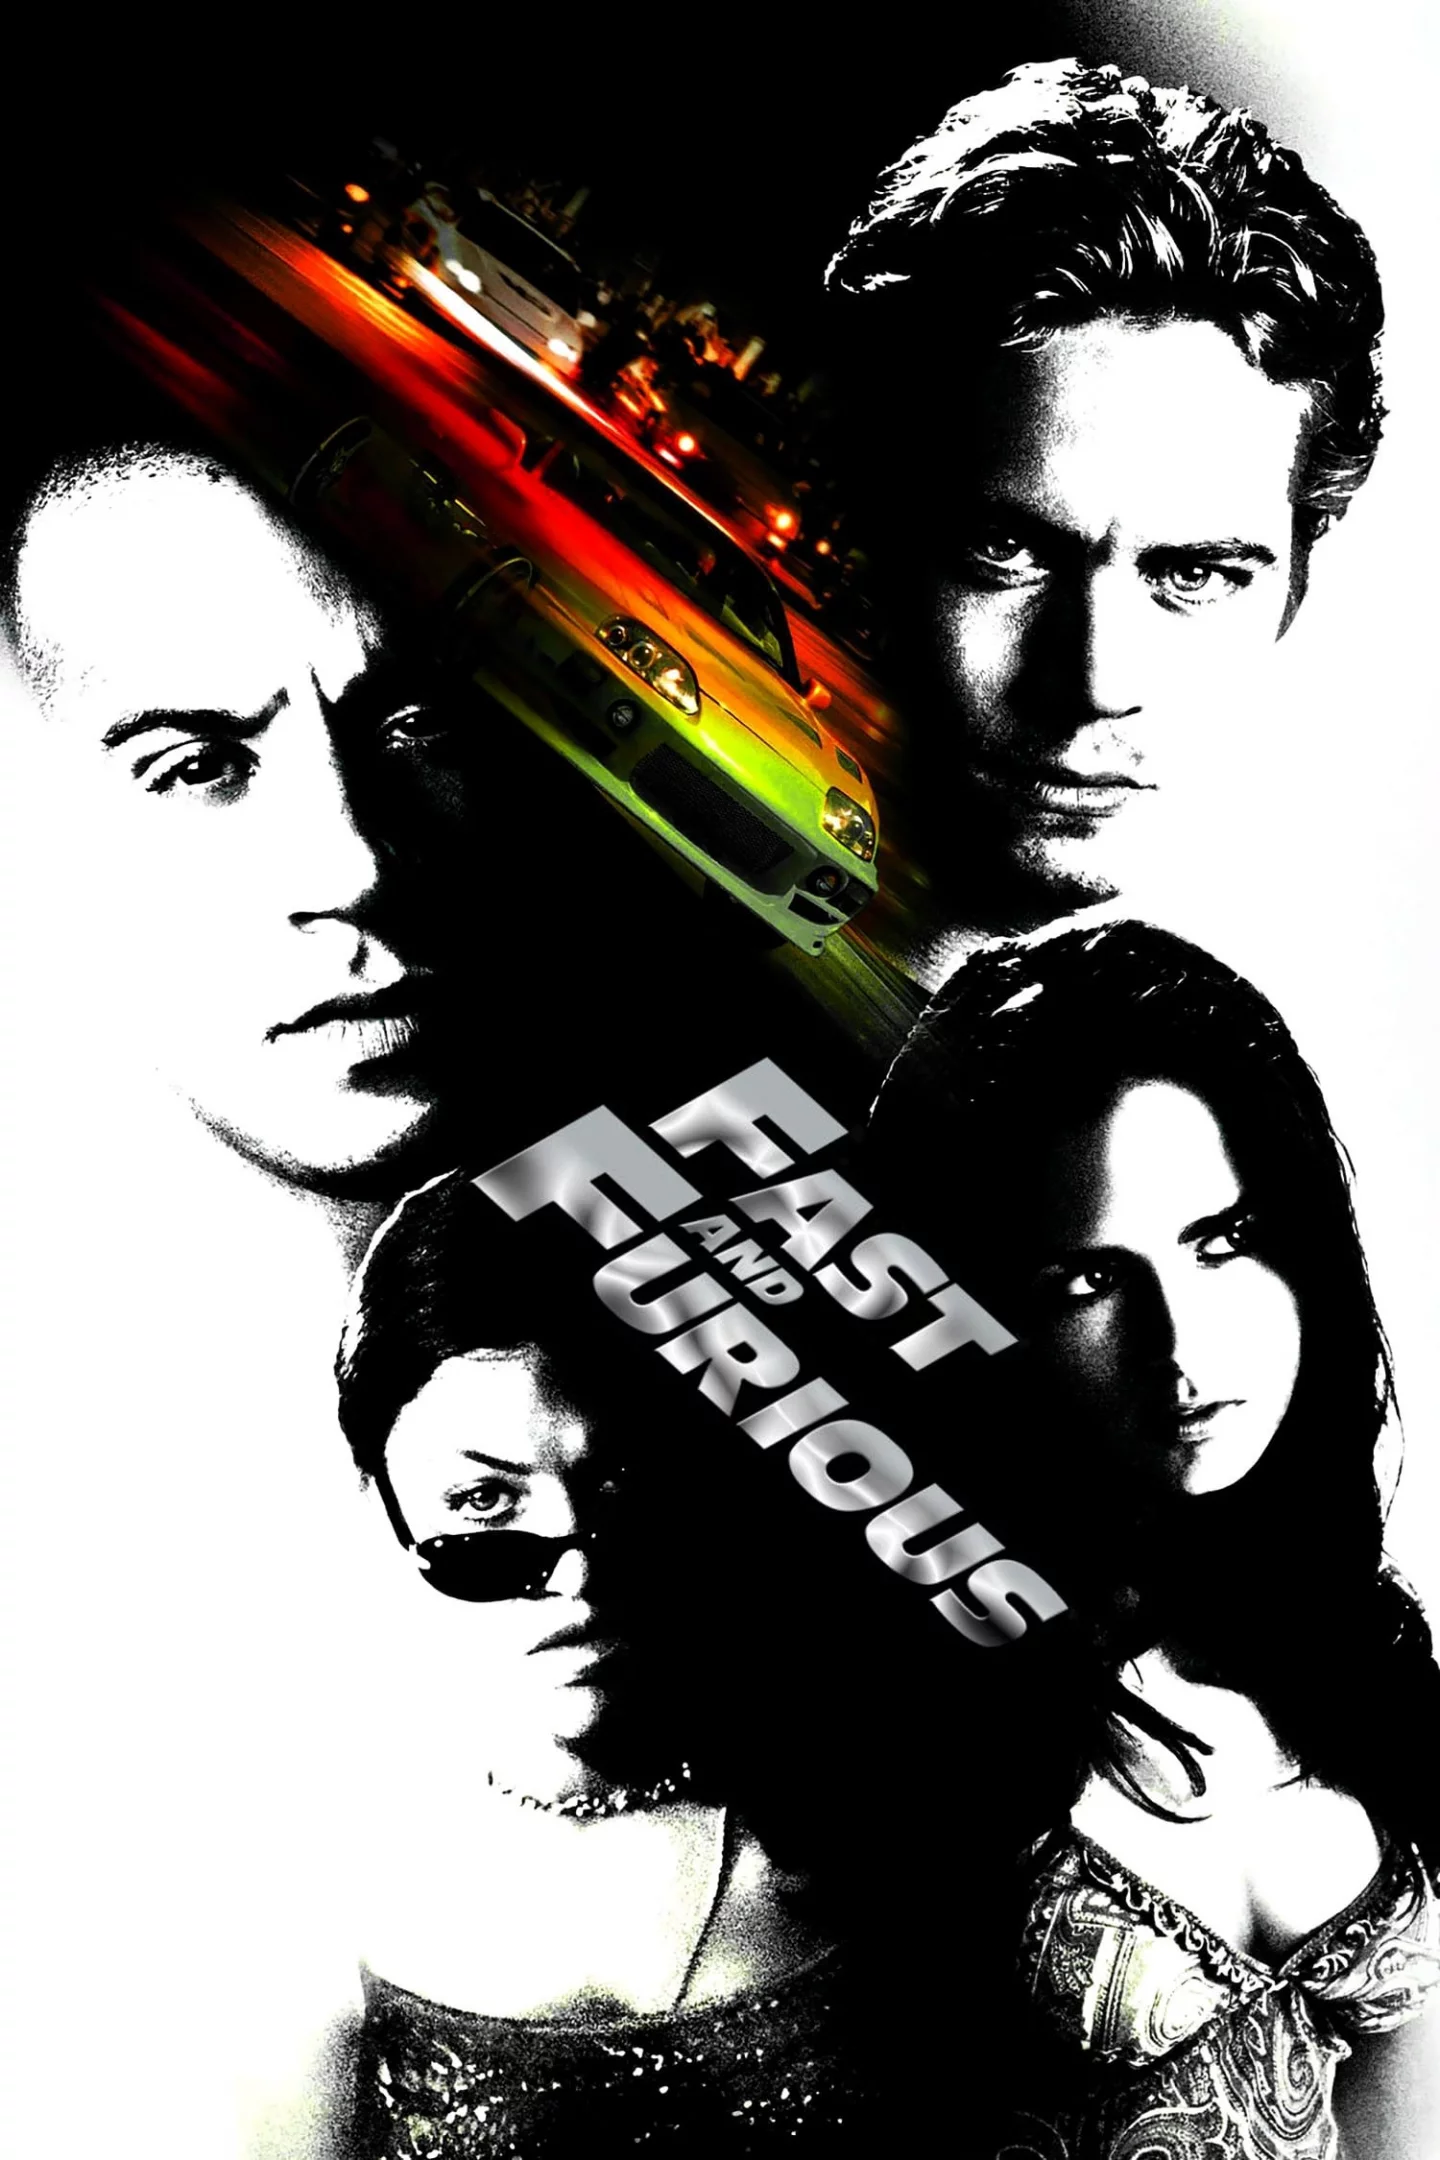 Photo du film : Fast and furious